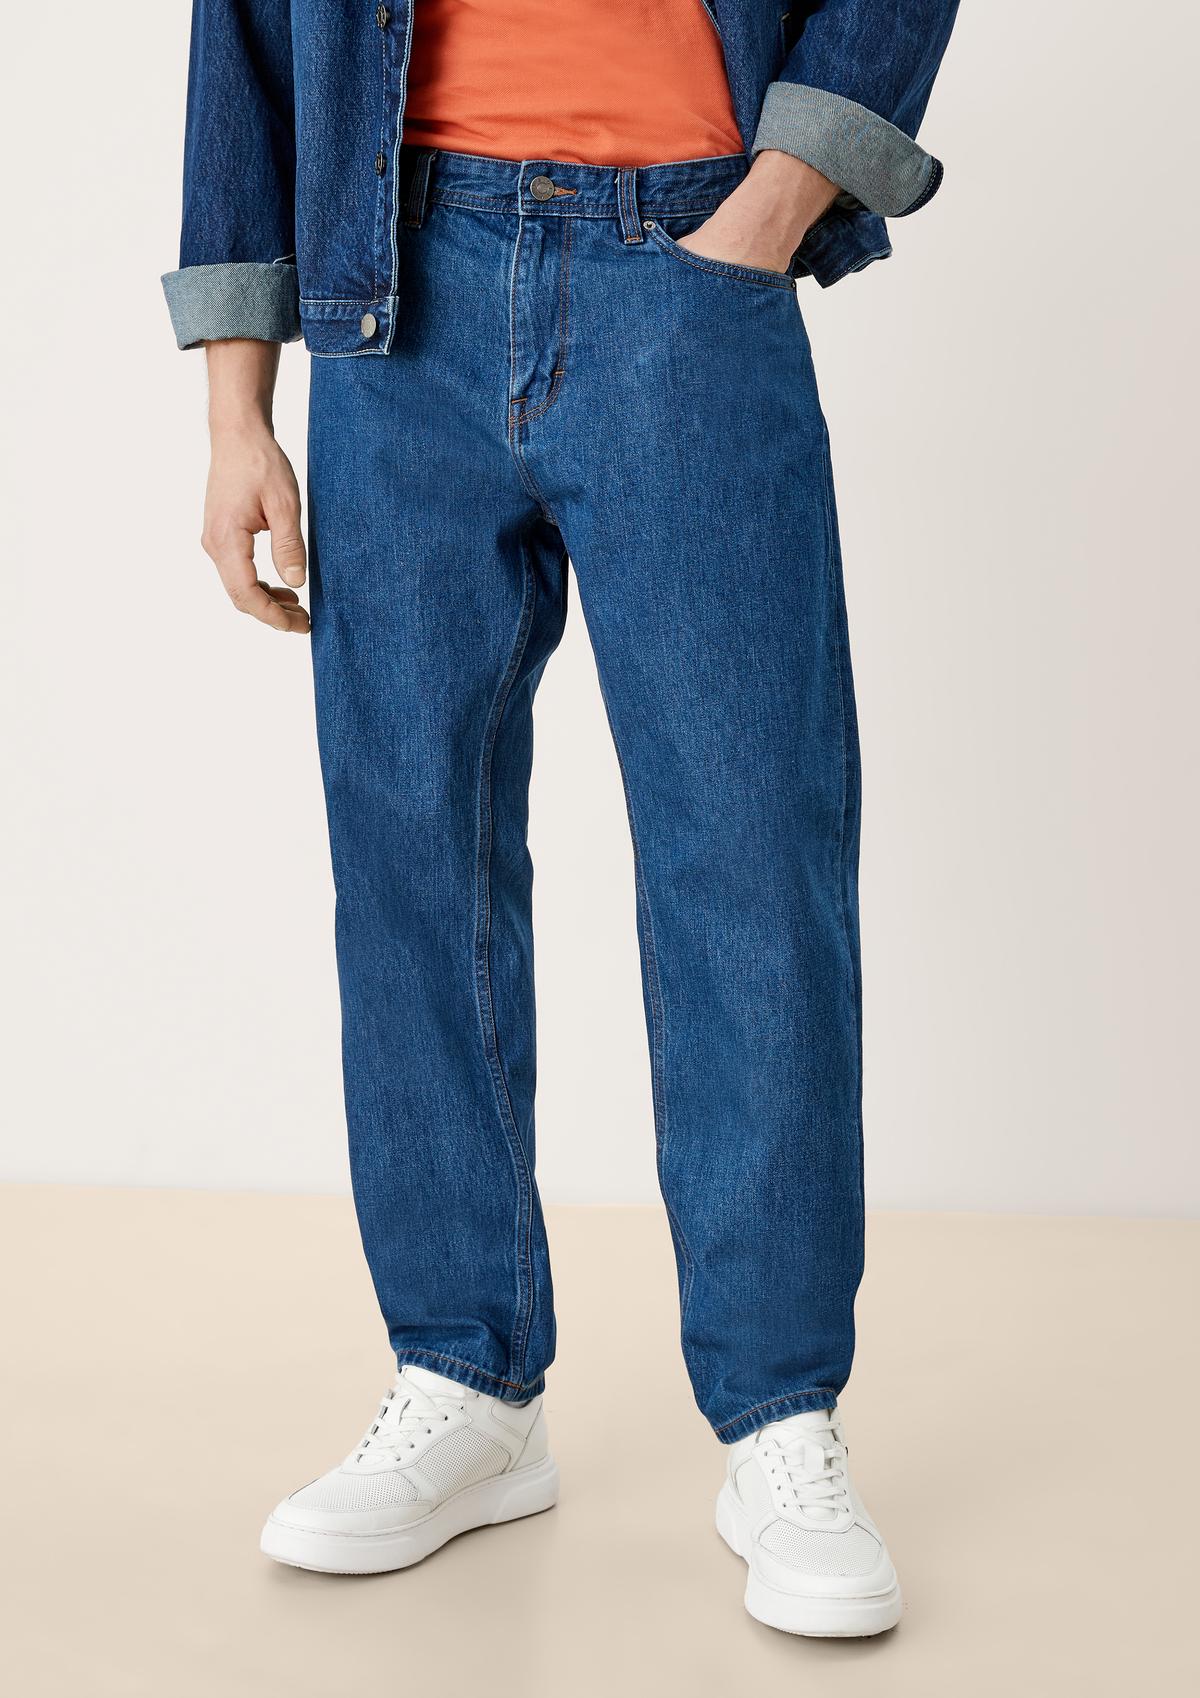 Relaxed: tapered leg jeans